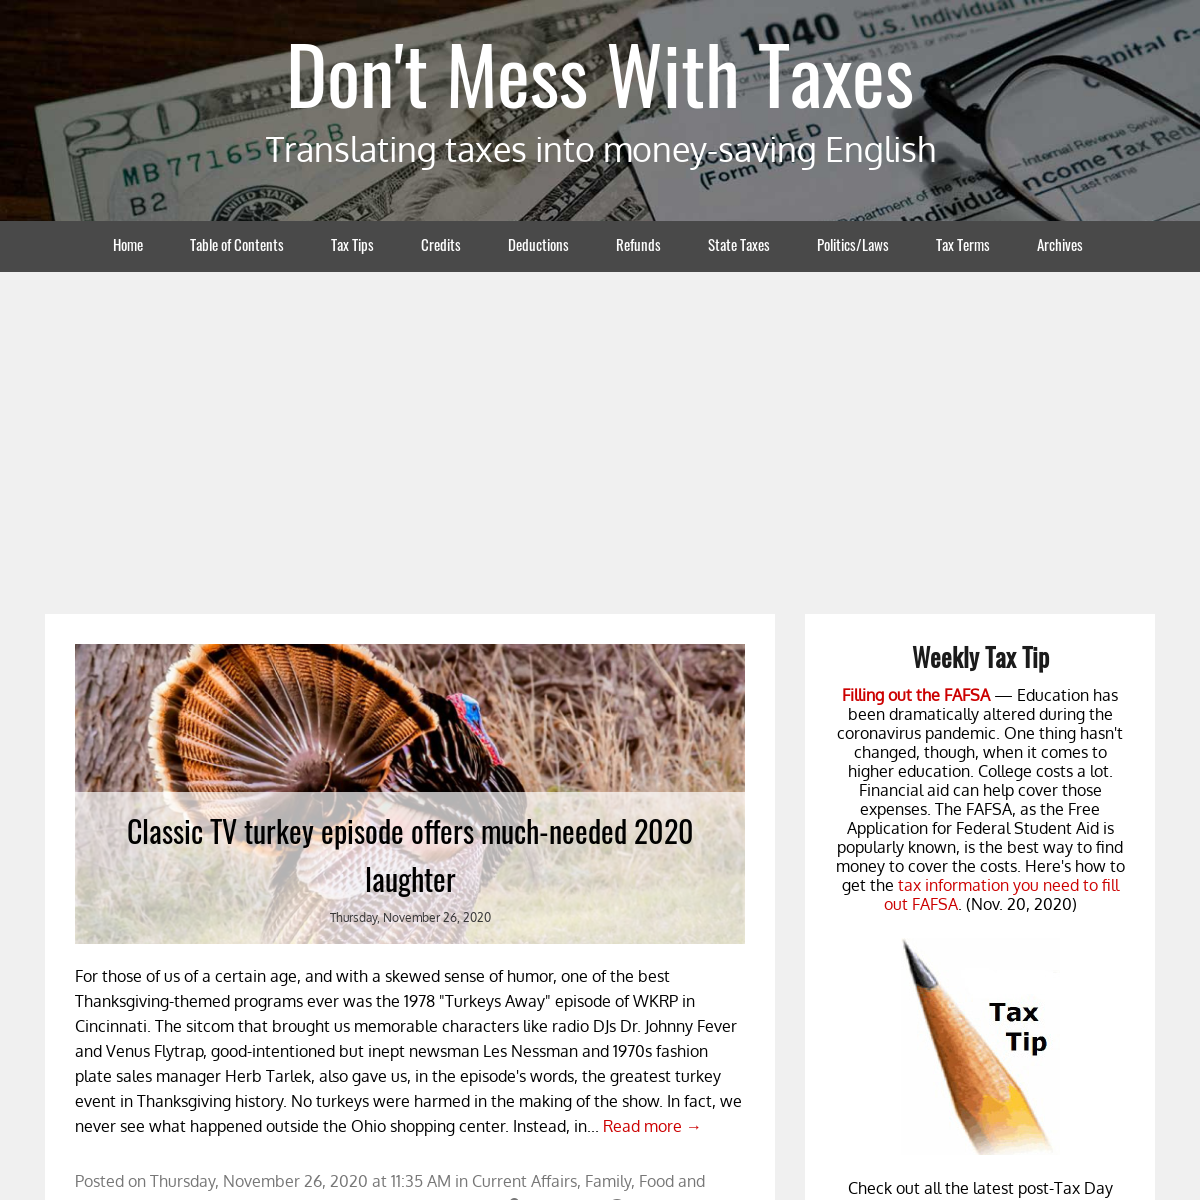 A complete backup of dontmesswithtaxes.com